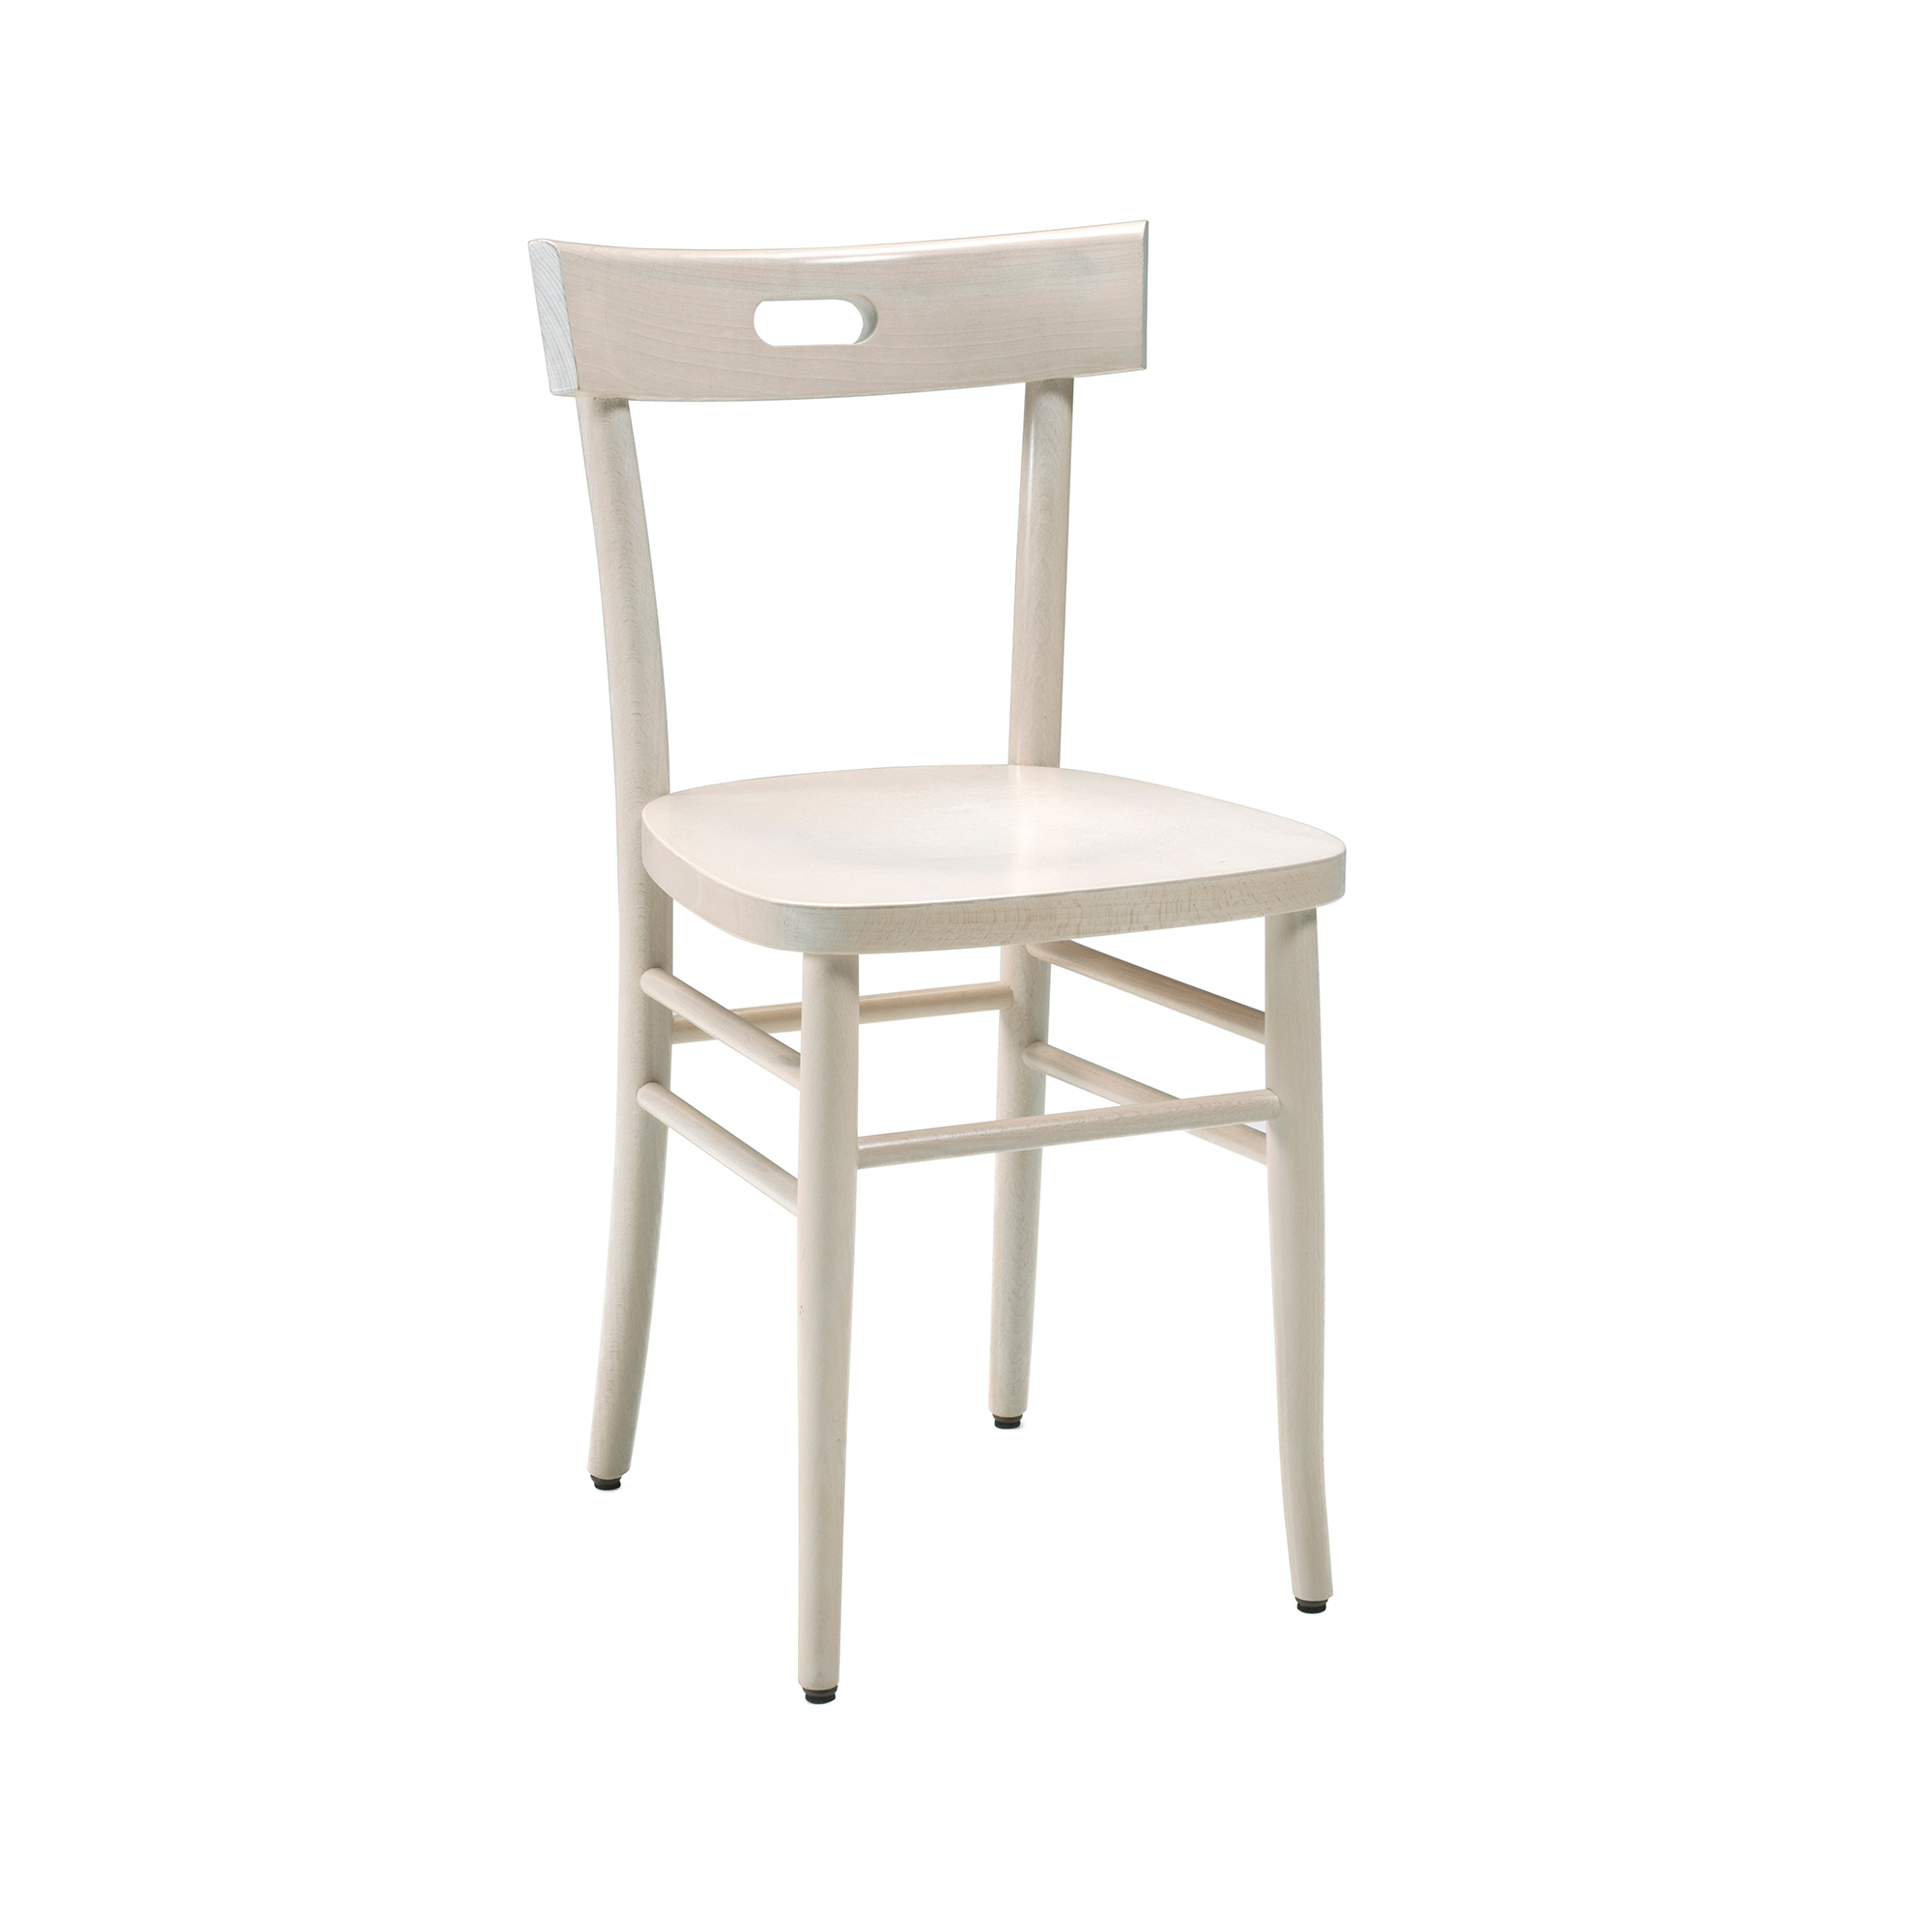 Model 876 chair in classic style